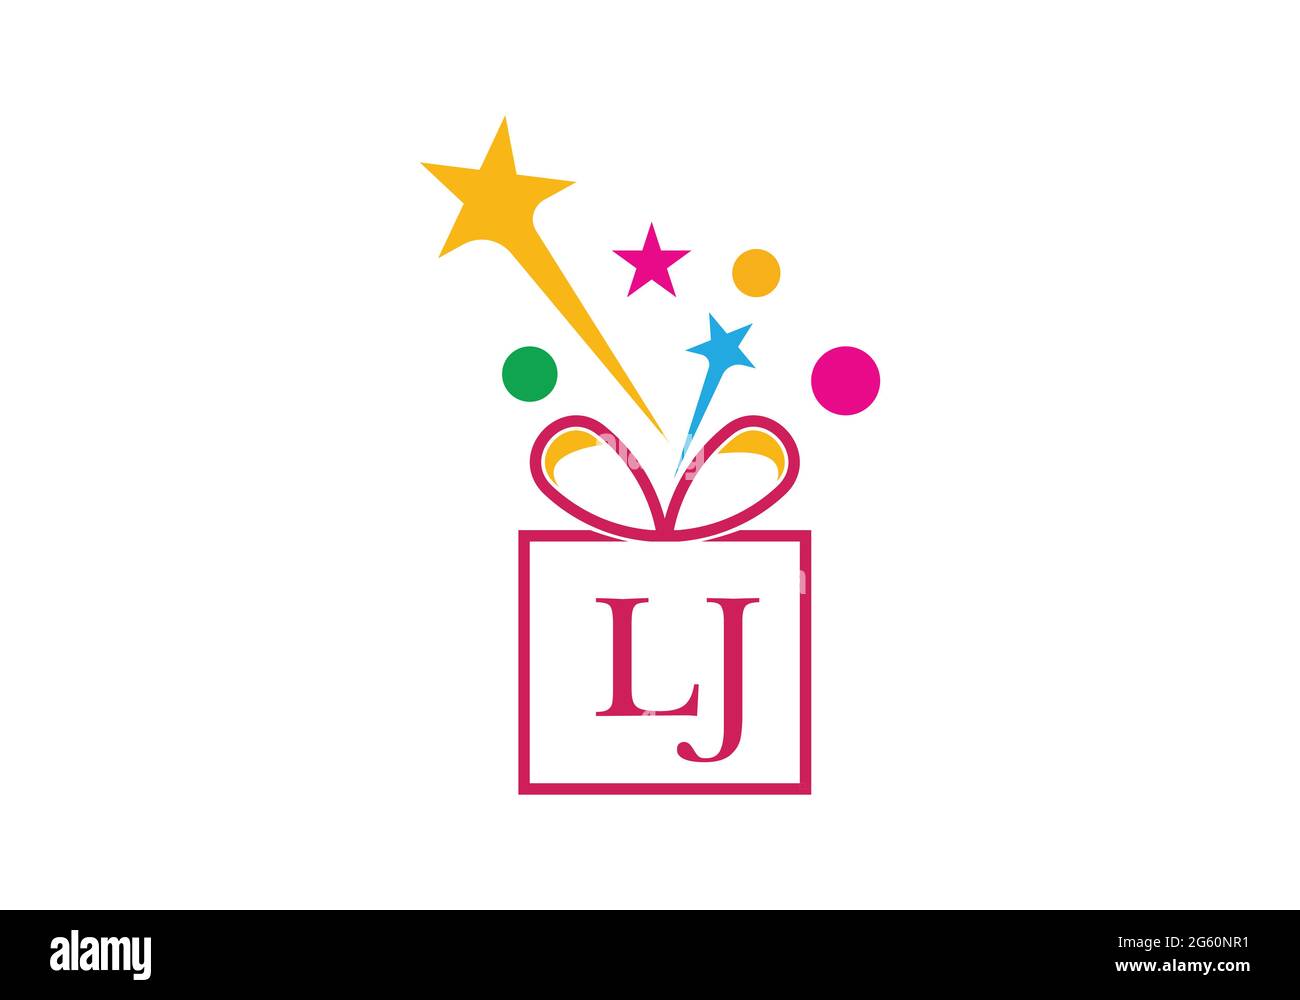 Gift Box, gift shop letter alphabet L J logo icon for Luxury brand design for wedding invitations, greeting card, logo, and other design. Stock Vector